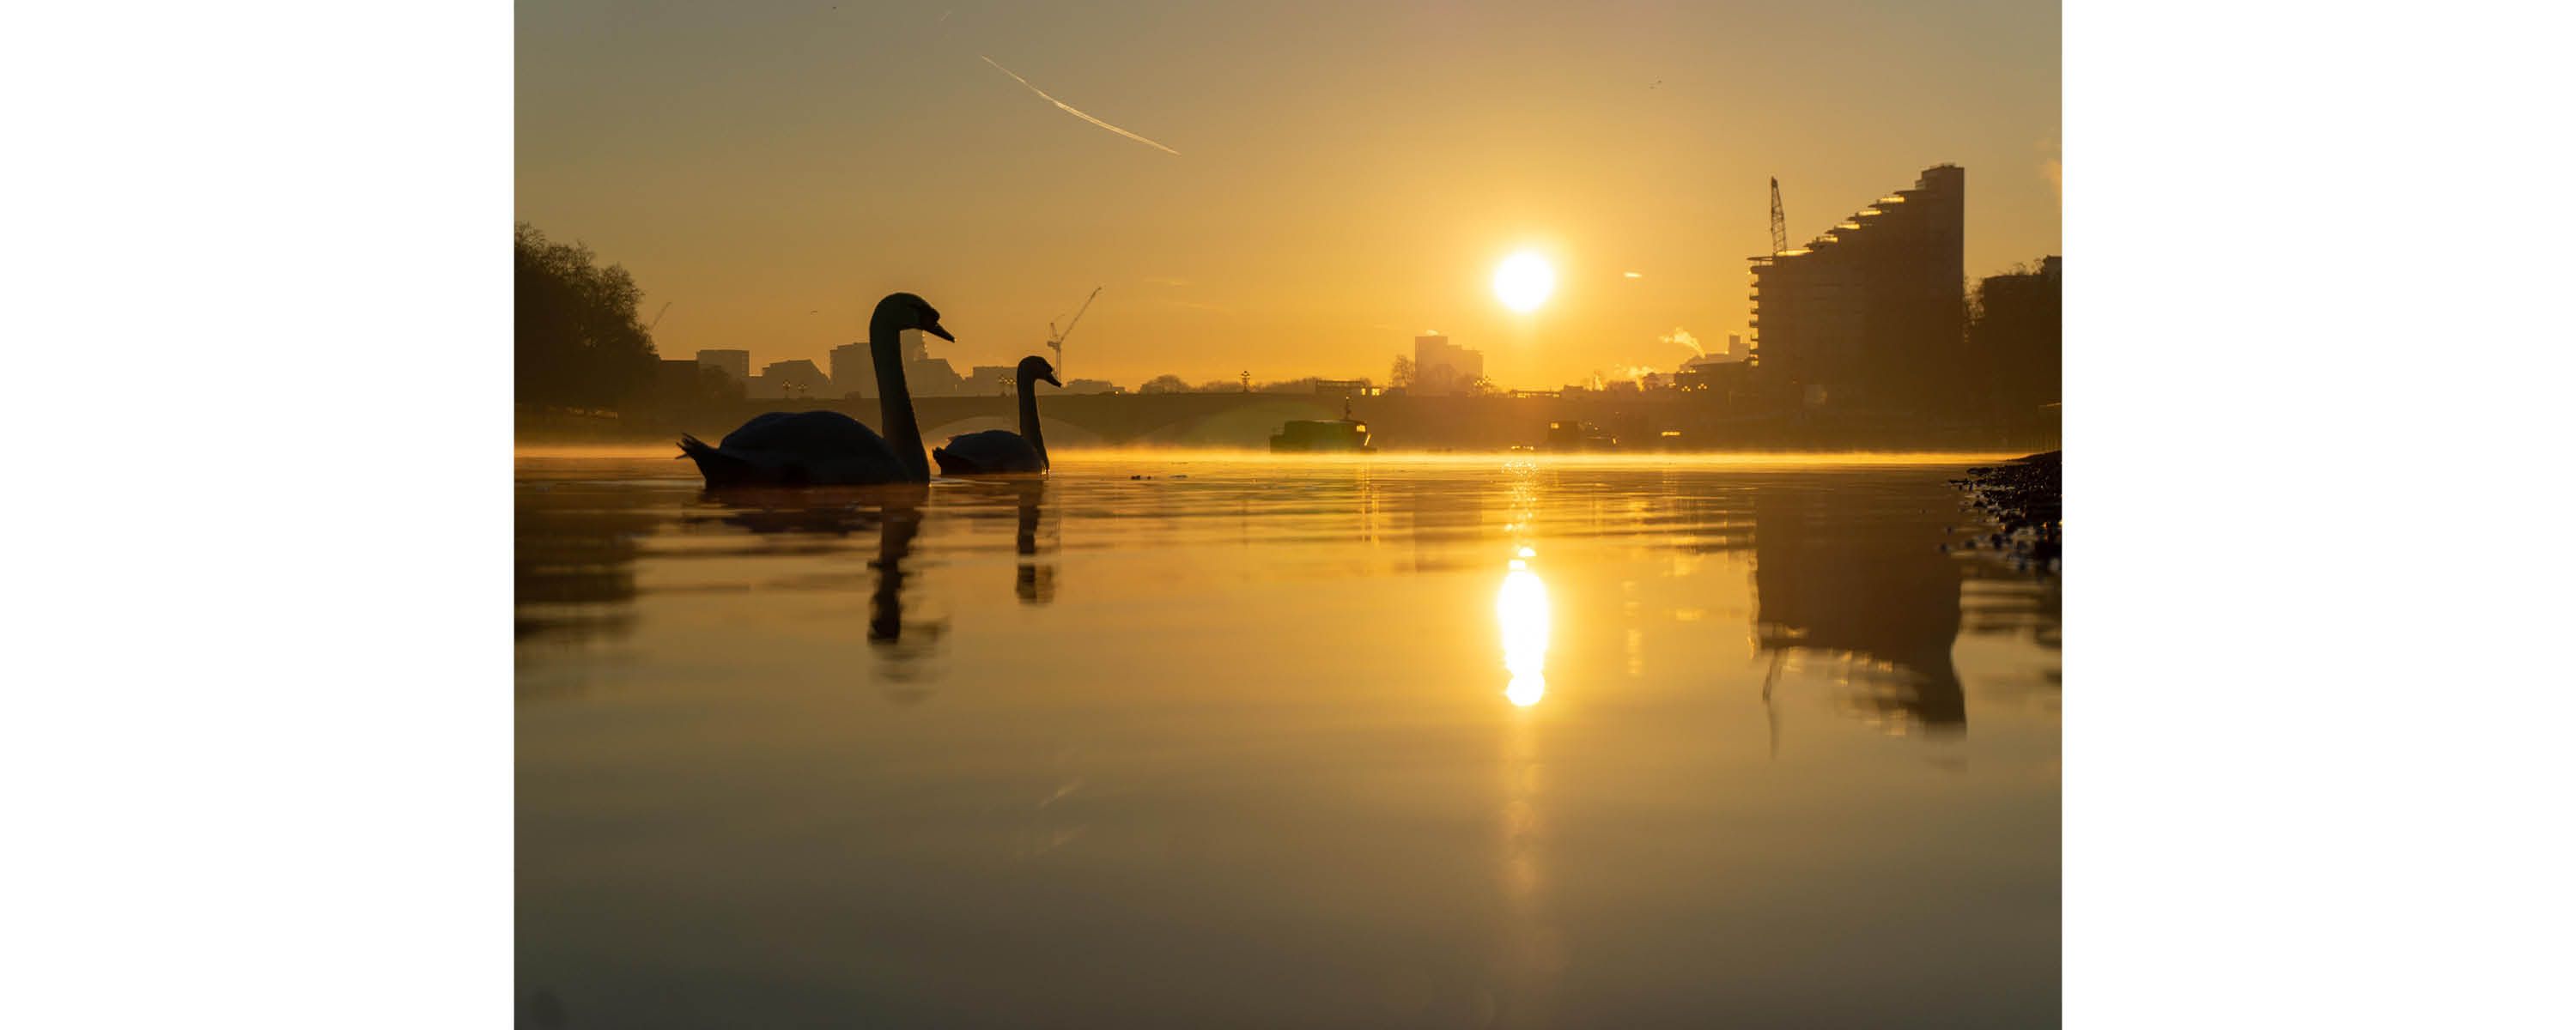 Swans at sunset on a lake